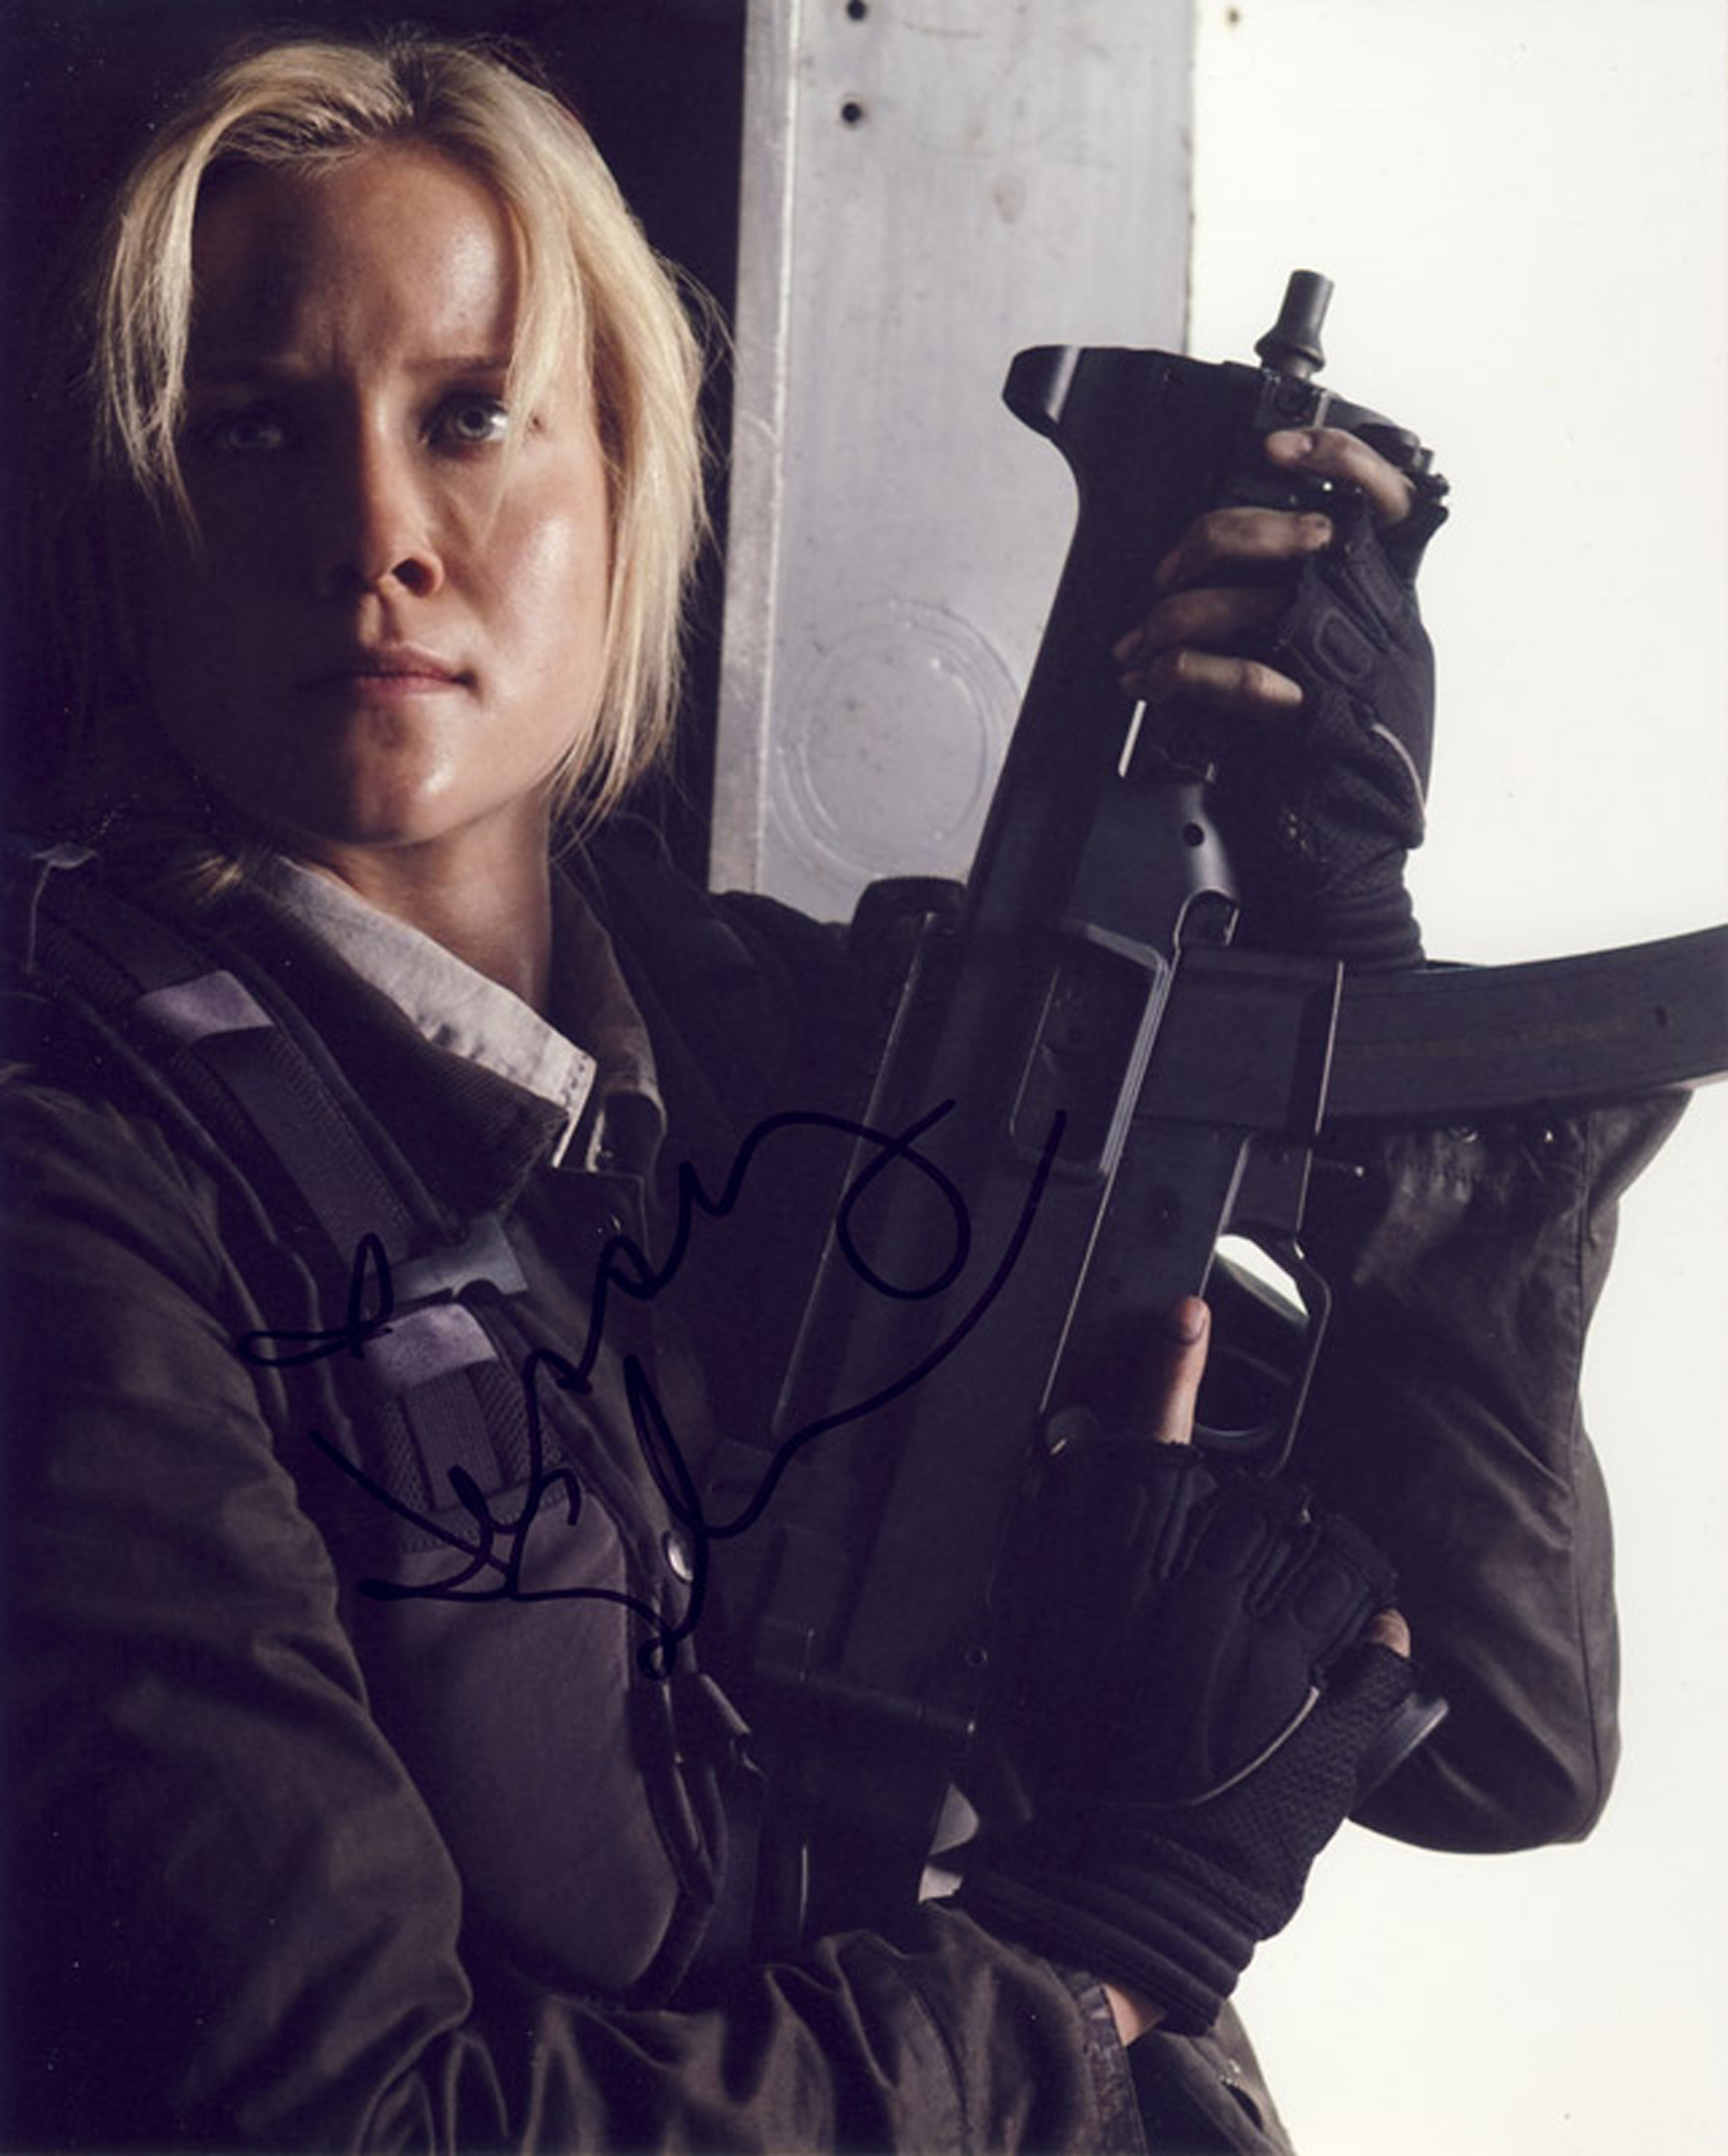 Blowout Sale! Falling Skies Jessy Schram hand signed 10x8 photo. This beautiful hand signed photo